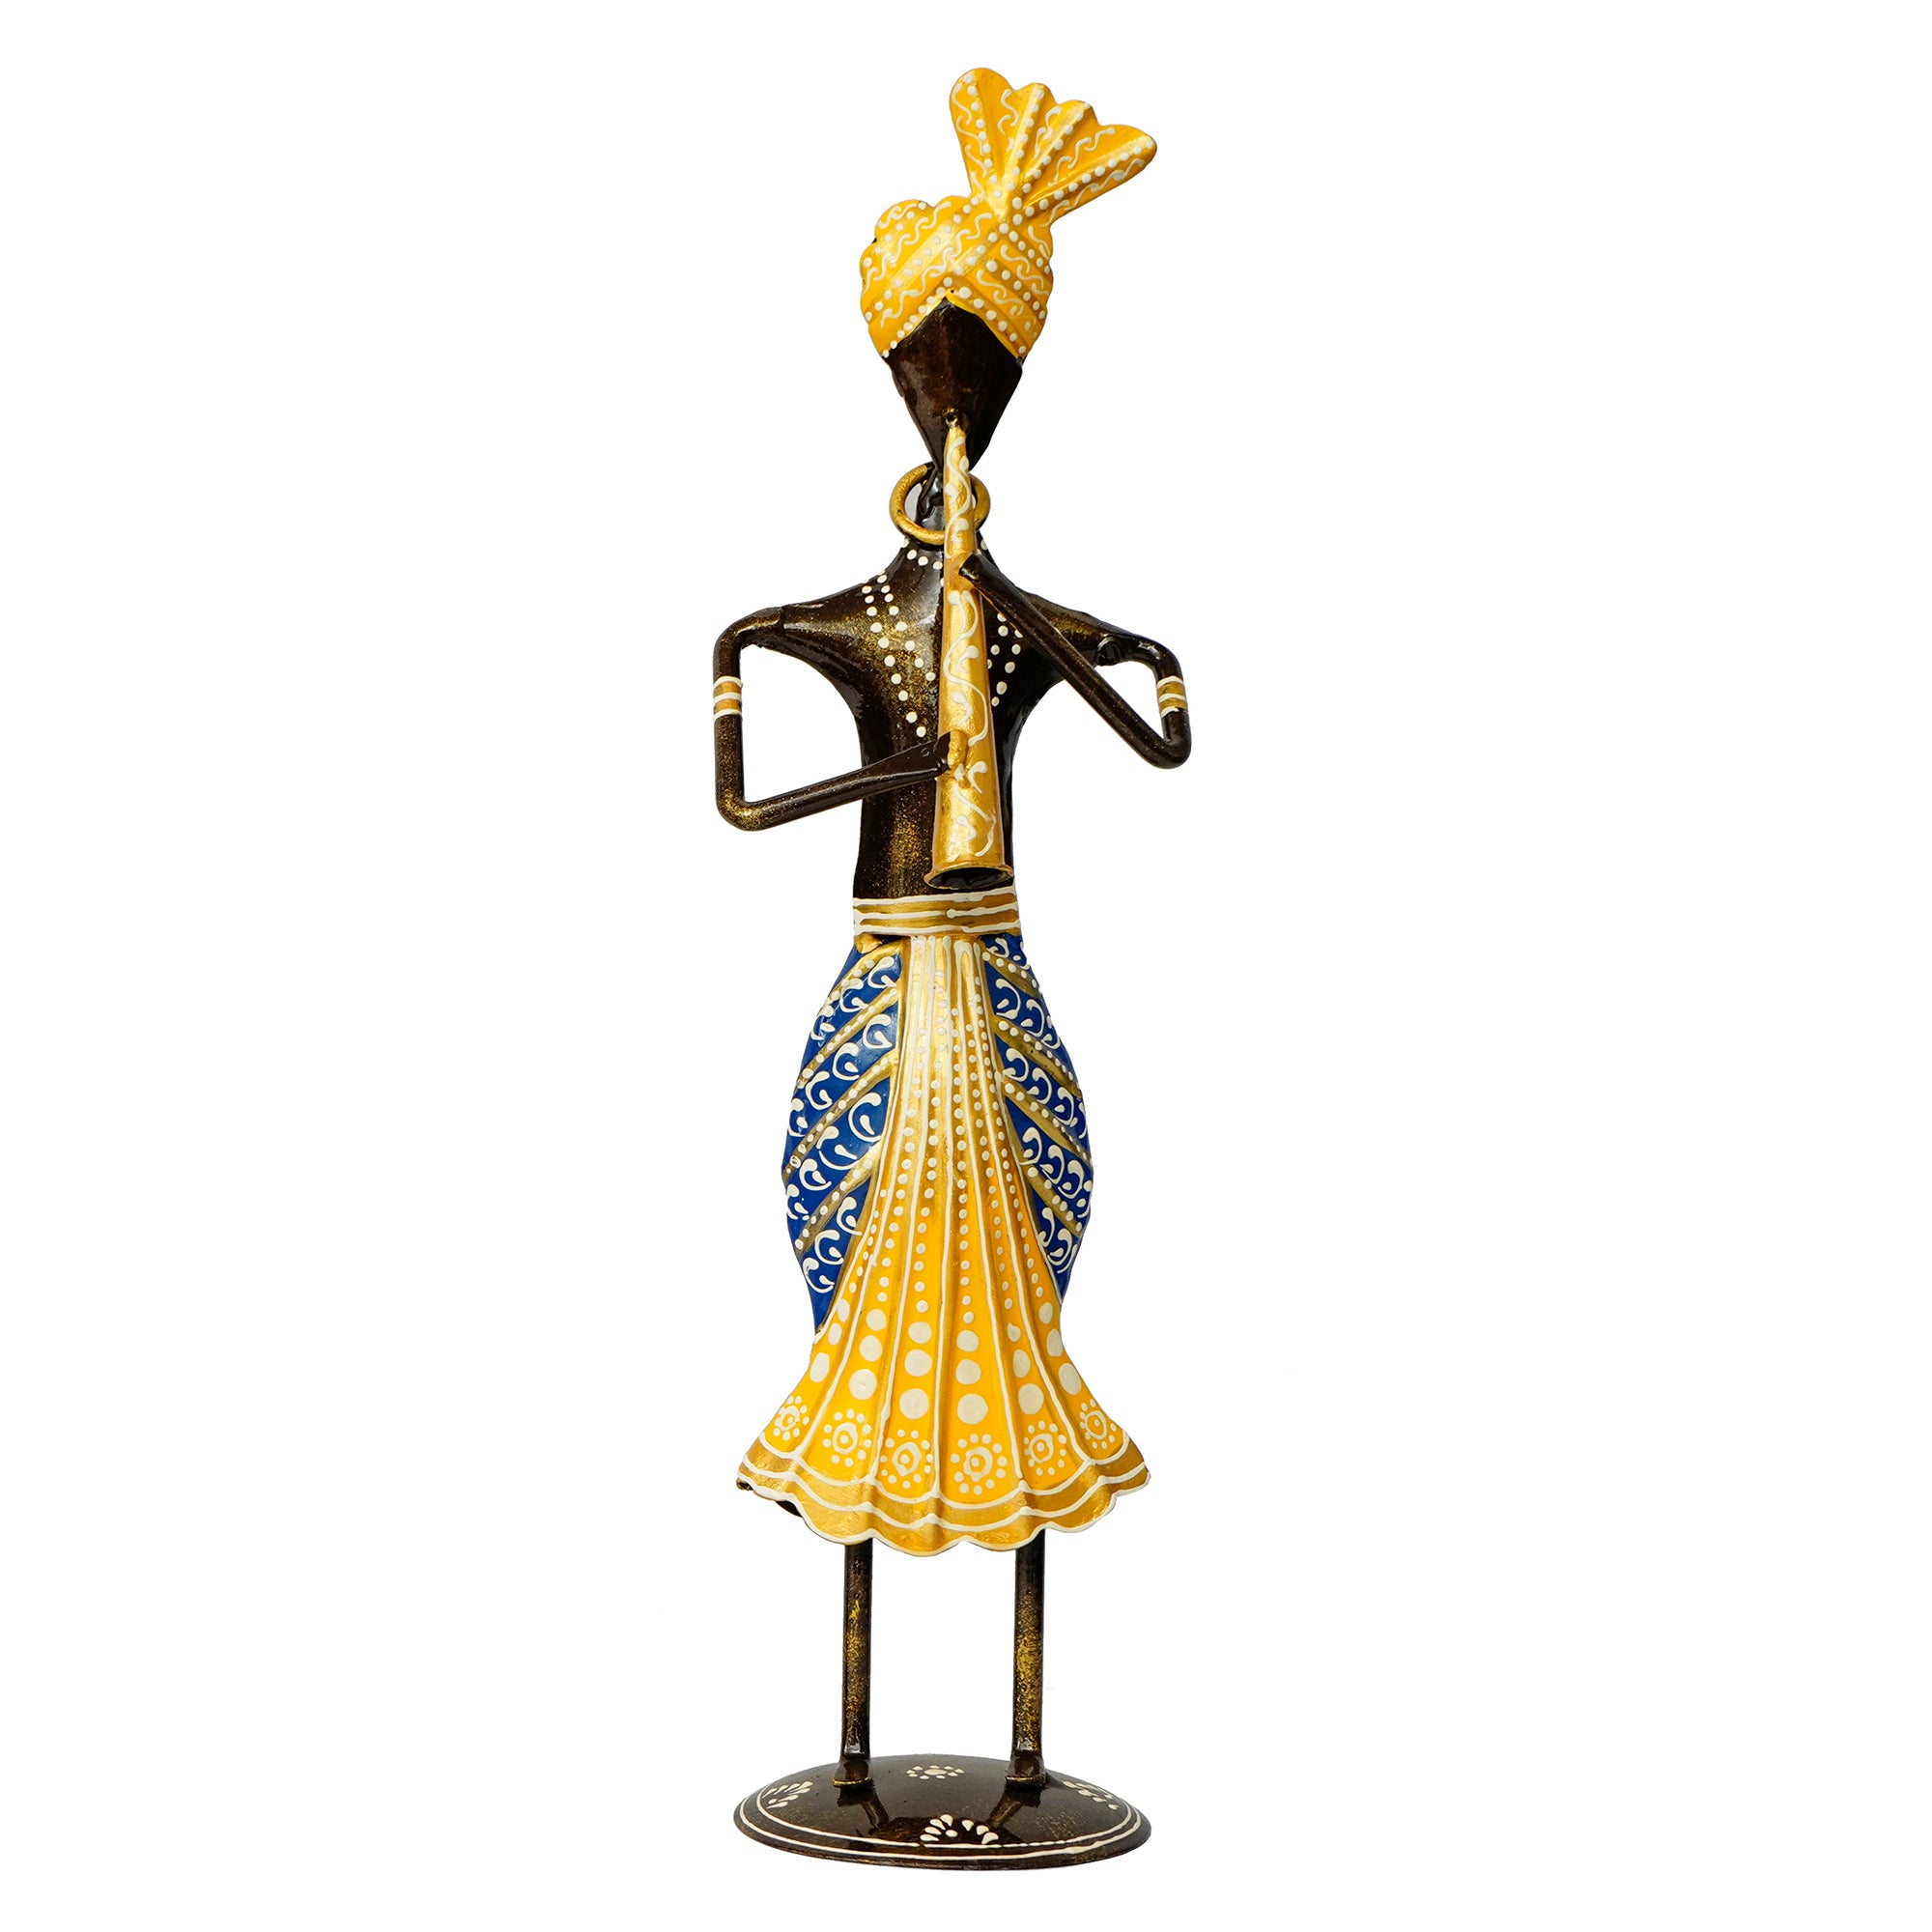 Iron Tribal Man Figurine Playing Trumpet Musical Instrument Decorative Showpiece (Black, Yellow and Blue) 2